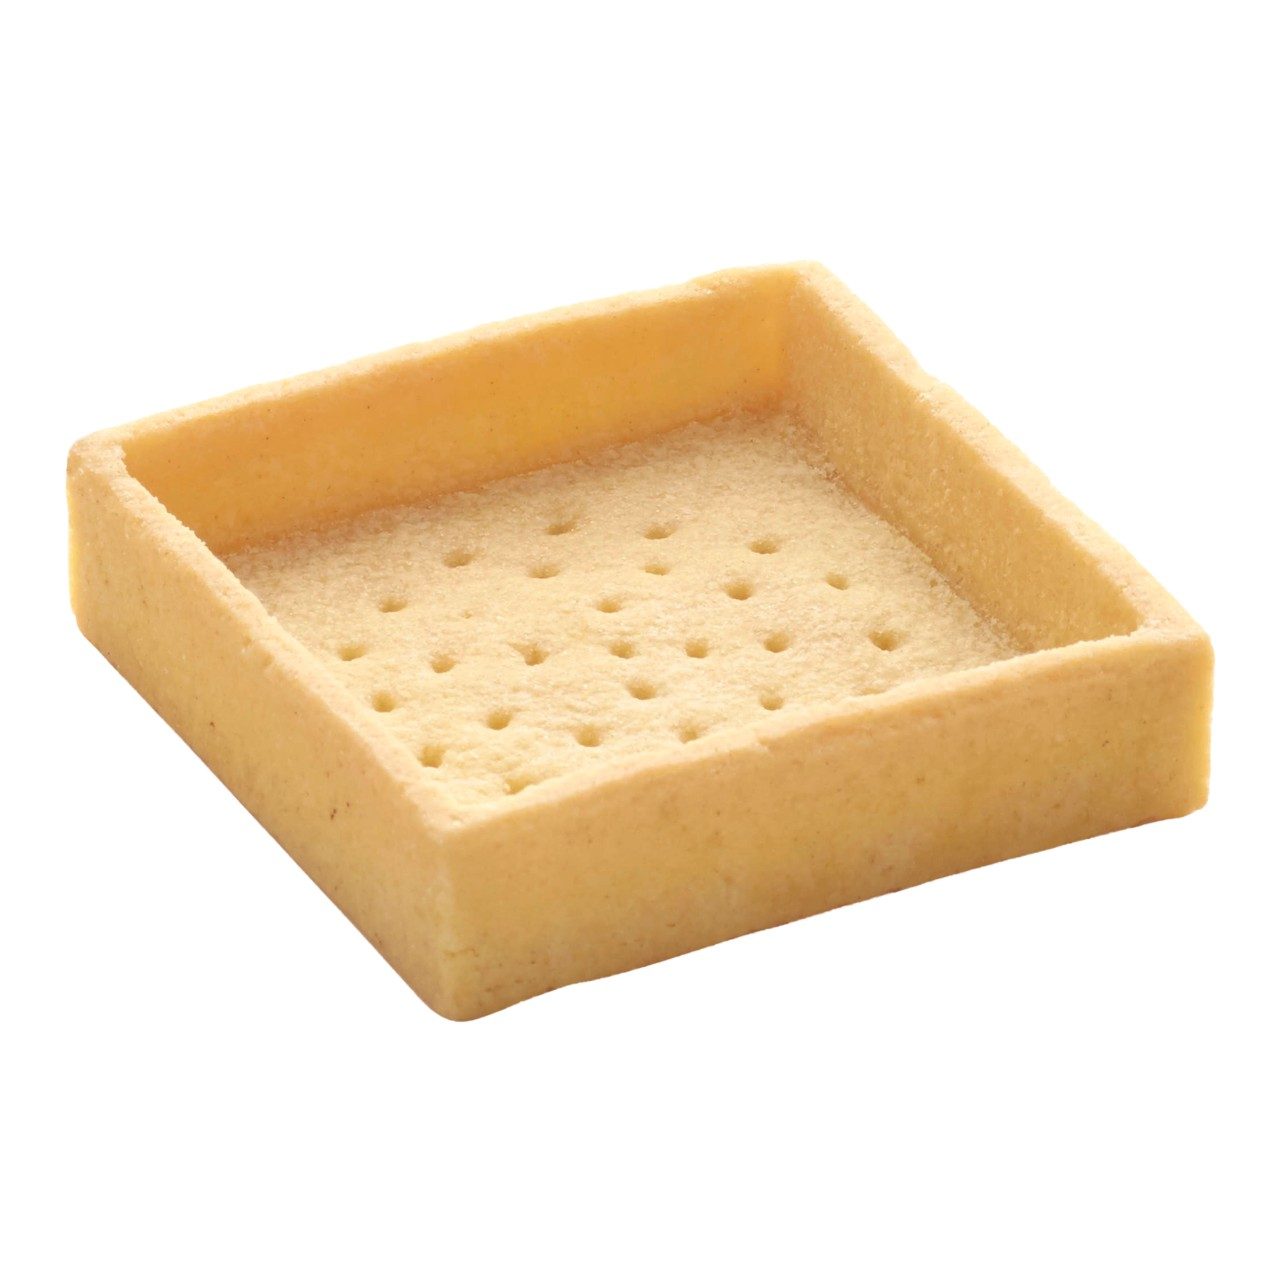 Trendy shell square sweet butter 7 x 7 cm